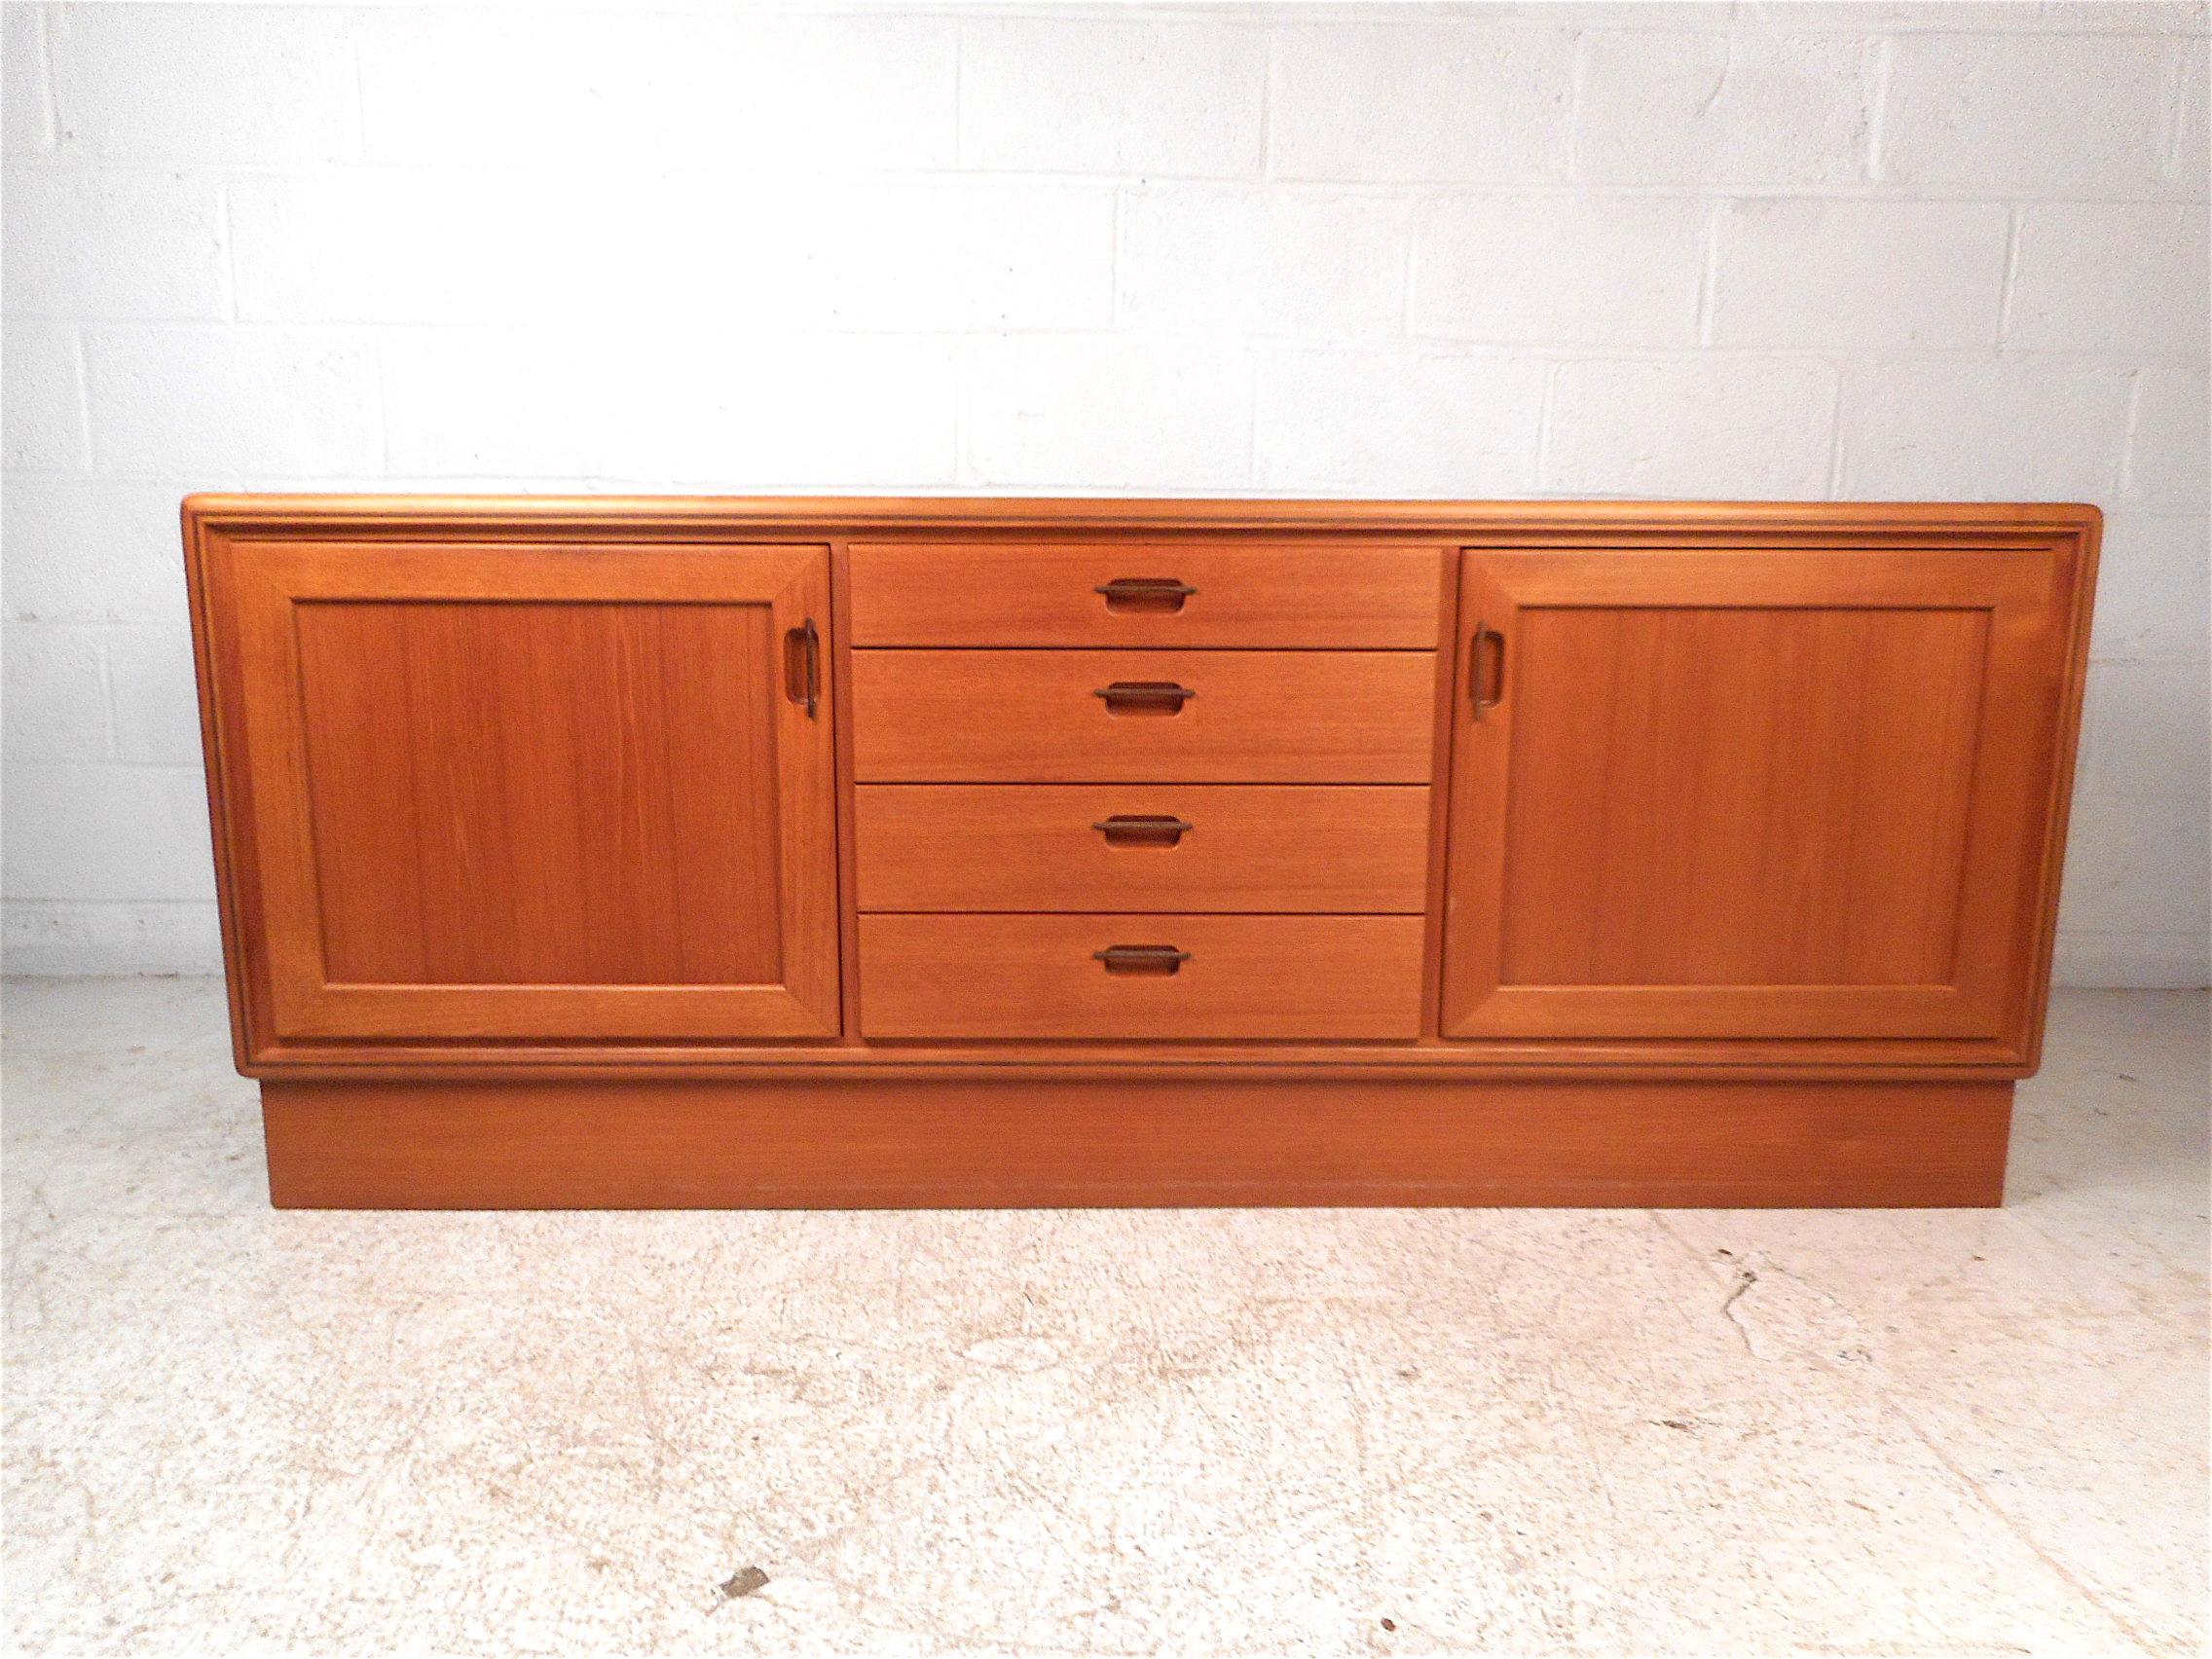 Impressive midcentury credenza. Handsome teak wood grain pattern throughout. Ample storage space, two cabinets on either side with adjustable shelving, four drawers in the center with the upper-most drawer having a felt-lined base, all